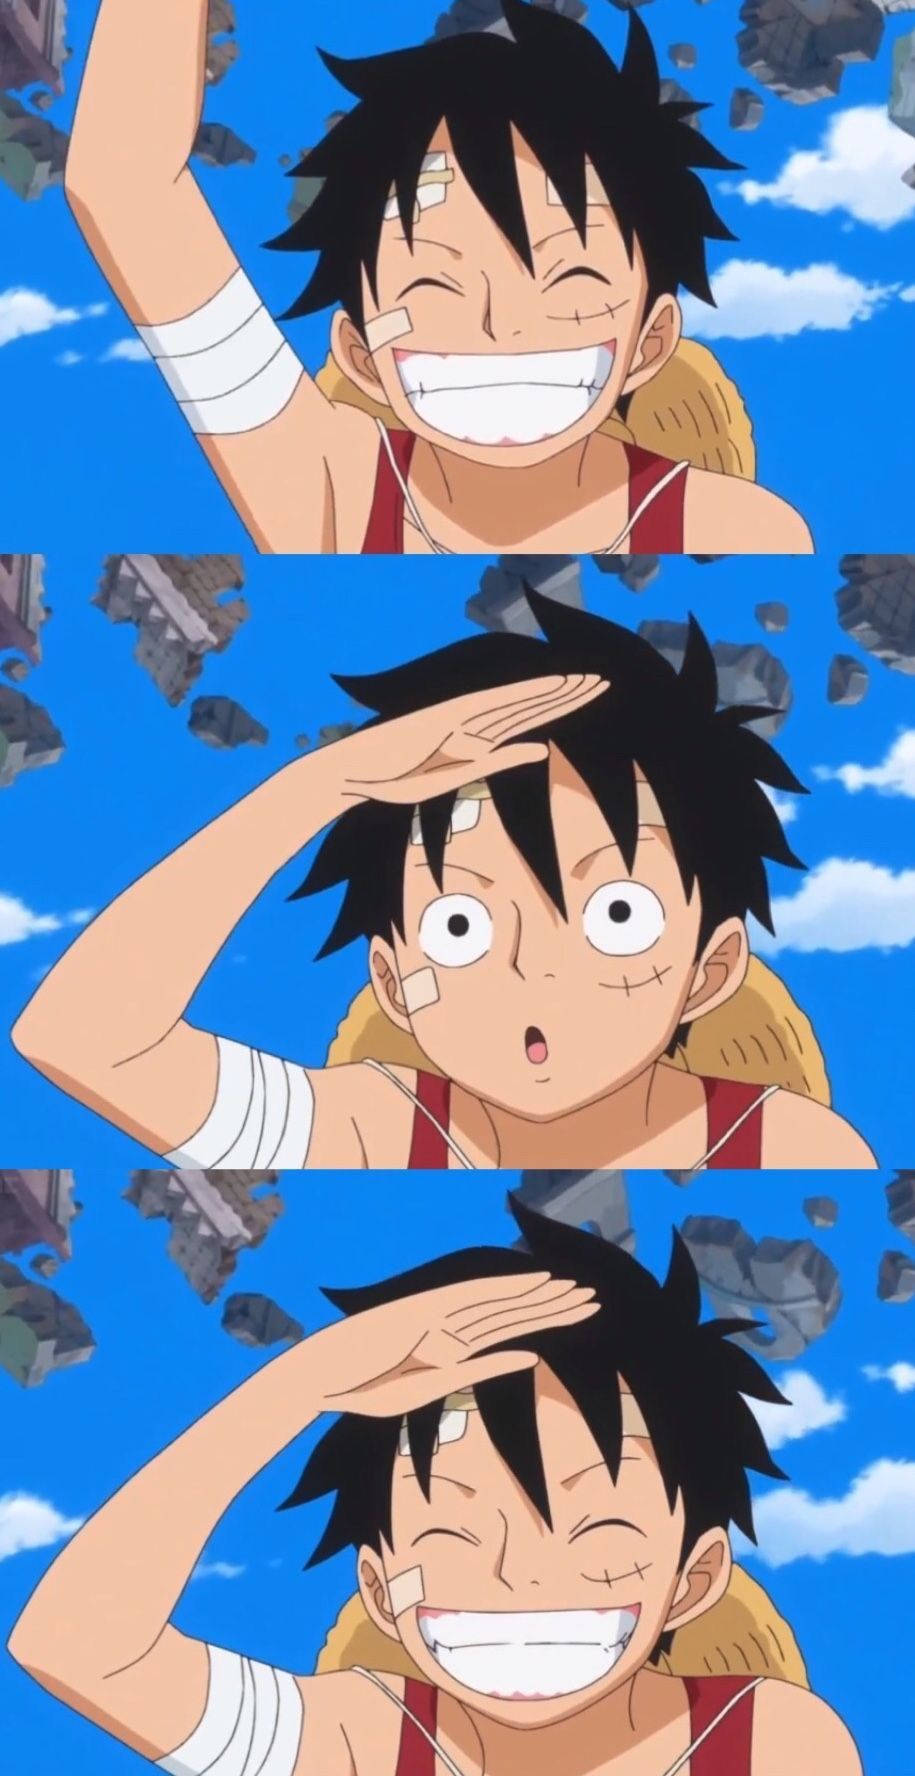 Luffy Smile With Hand On His Forehead Wallpaper